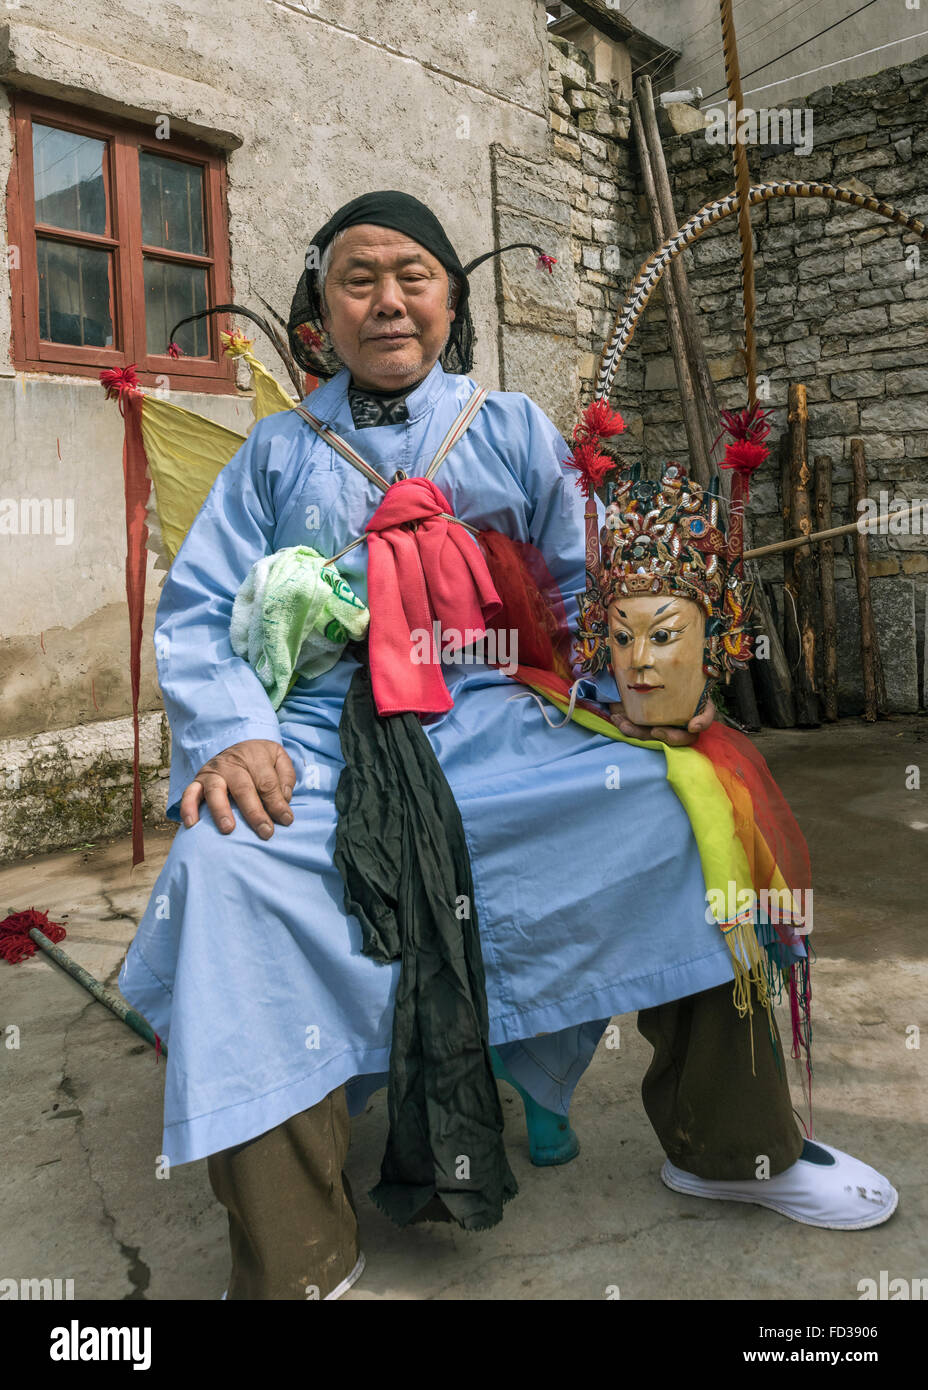 Unmasked Old Han Ground Opera performer resting in courtyard, Liuguan Old Han Village, Guizhou Province, China Stock Photo